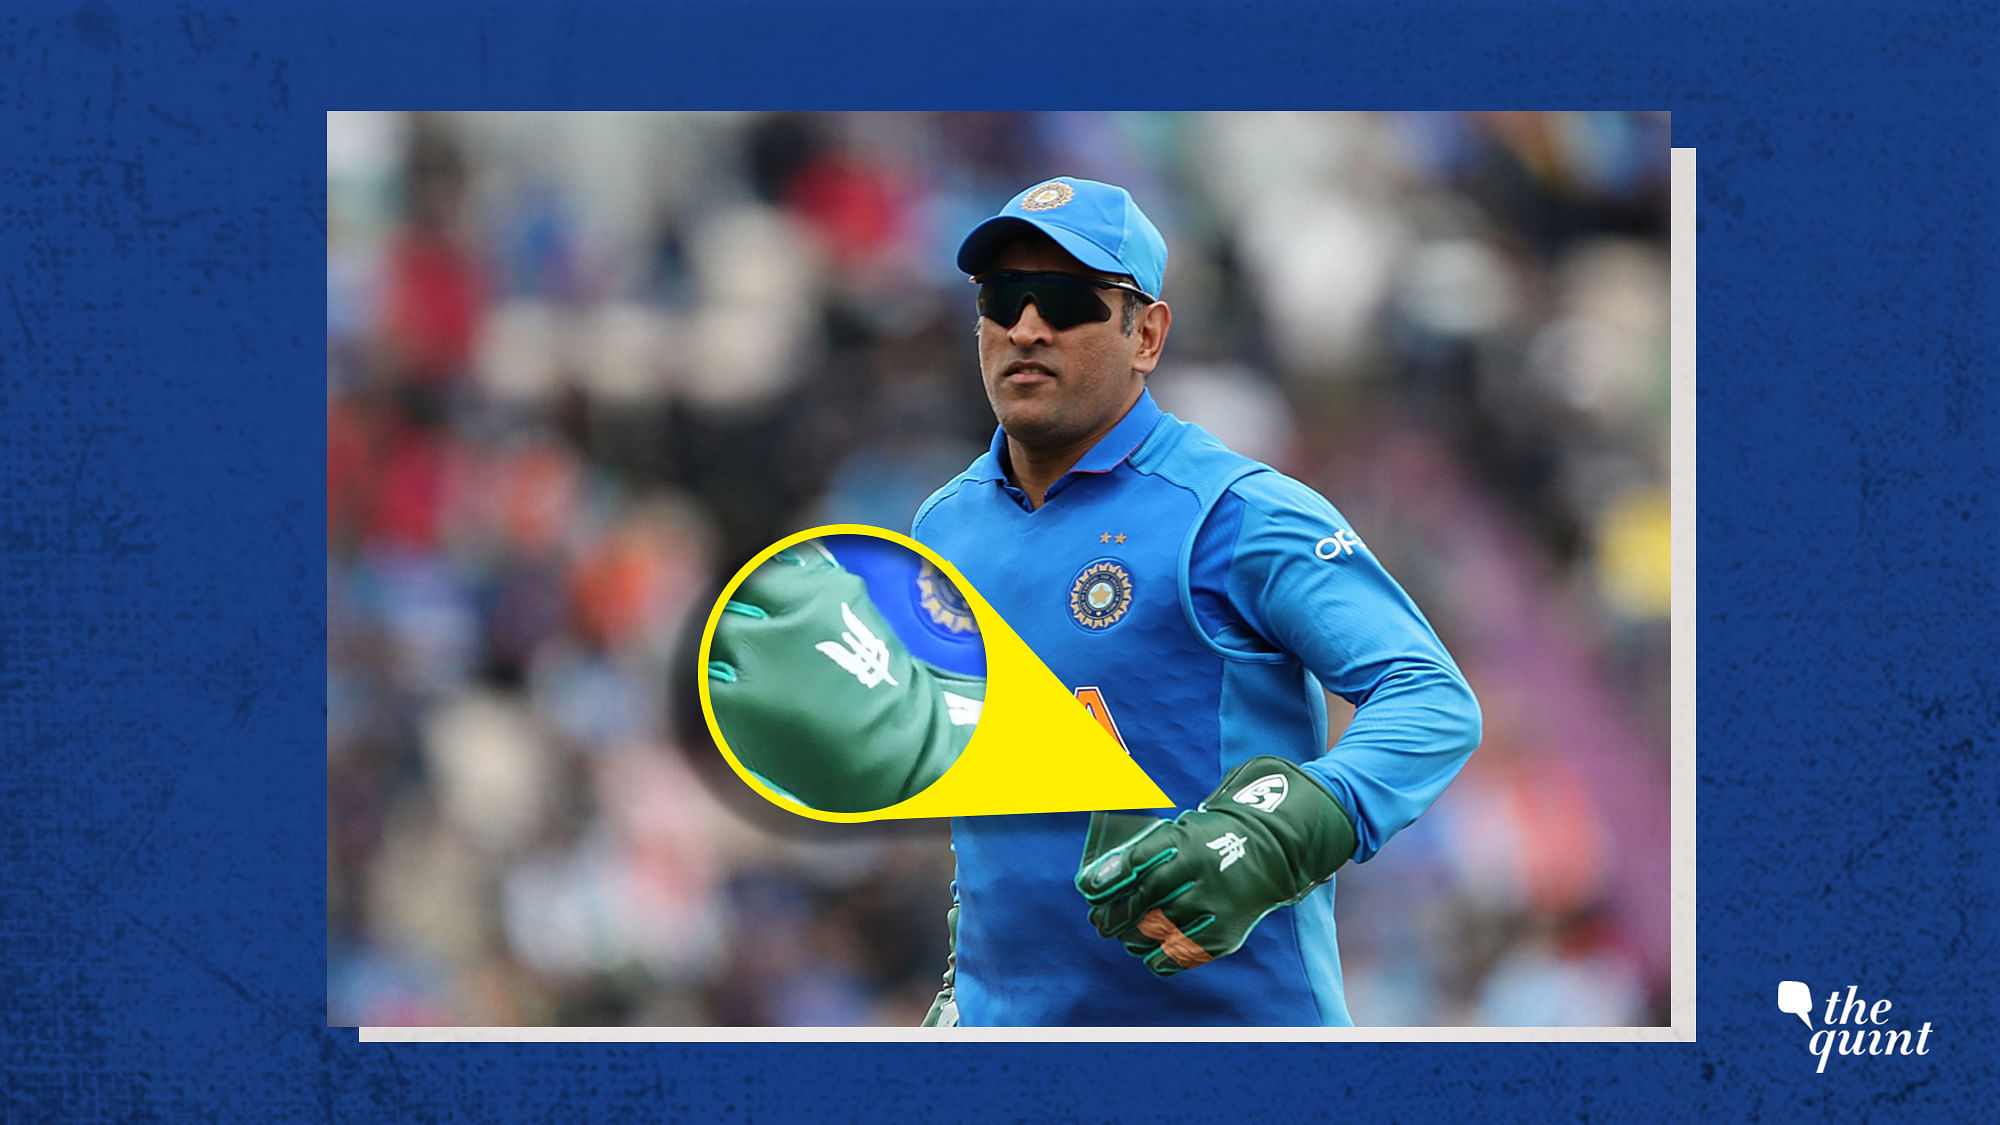 A look at what the ICC rules say about MS Dhoni wearing an Army insignia on his wicket-keeping gloves at the ICC World Cup.